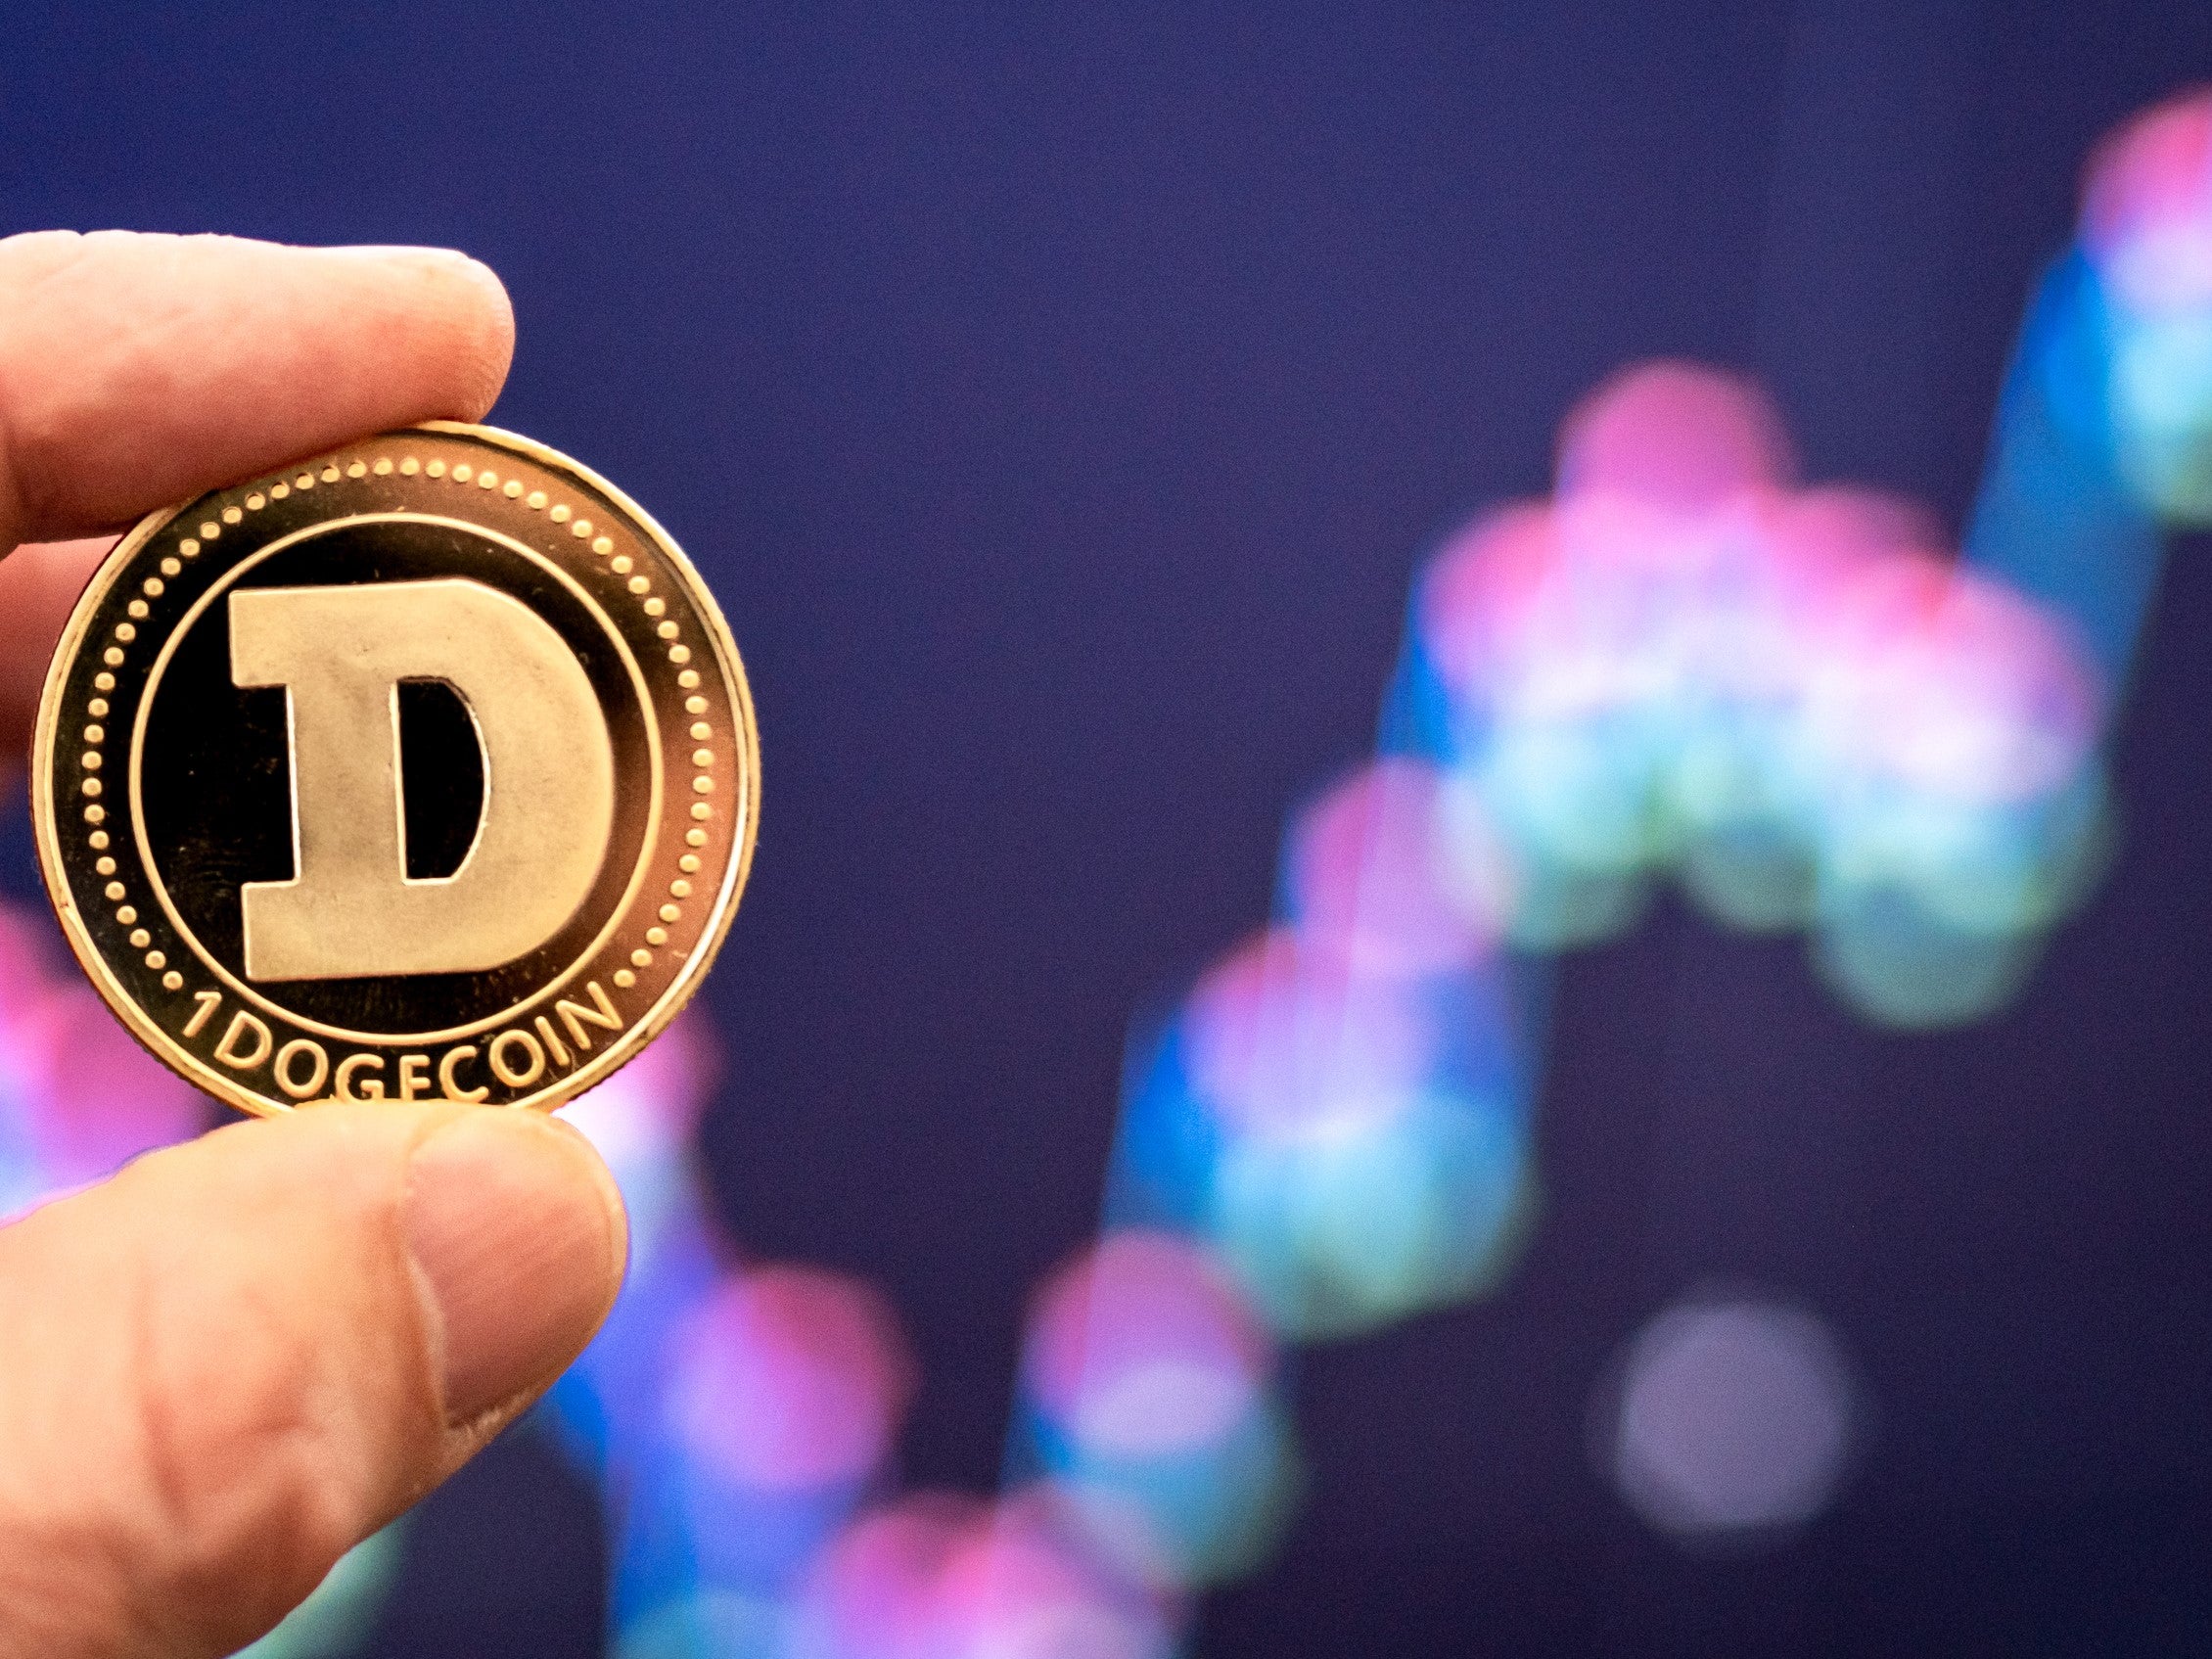 Dogecoin has risen in price by more than 11,000 per cent in 2021